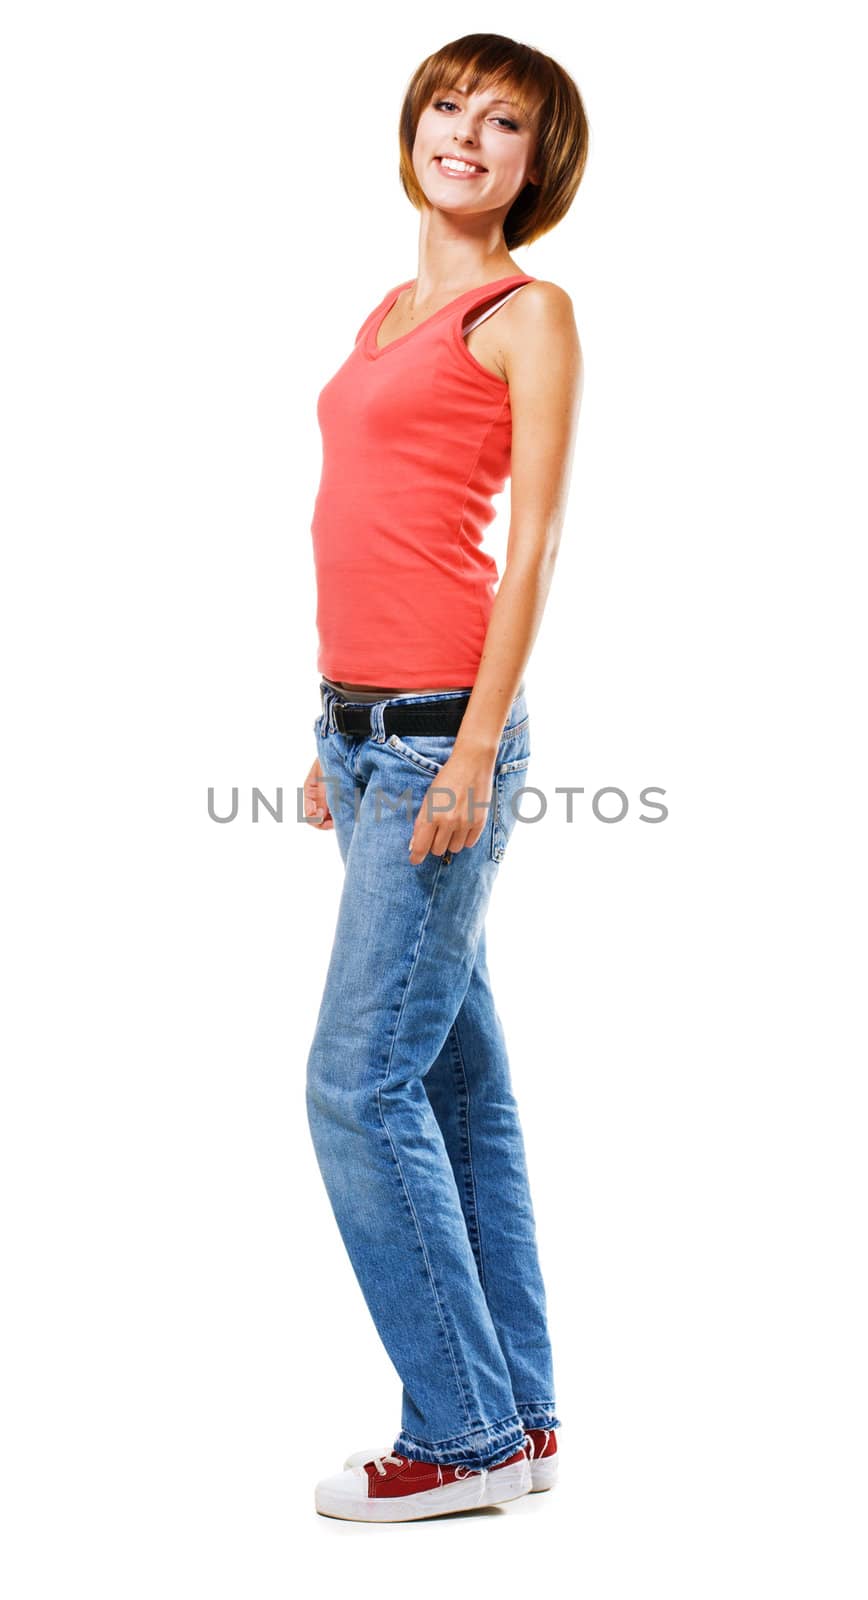 Young happy woman, isolated on white background 